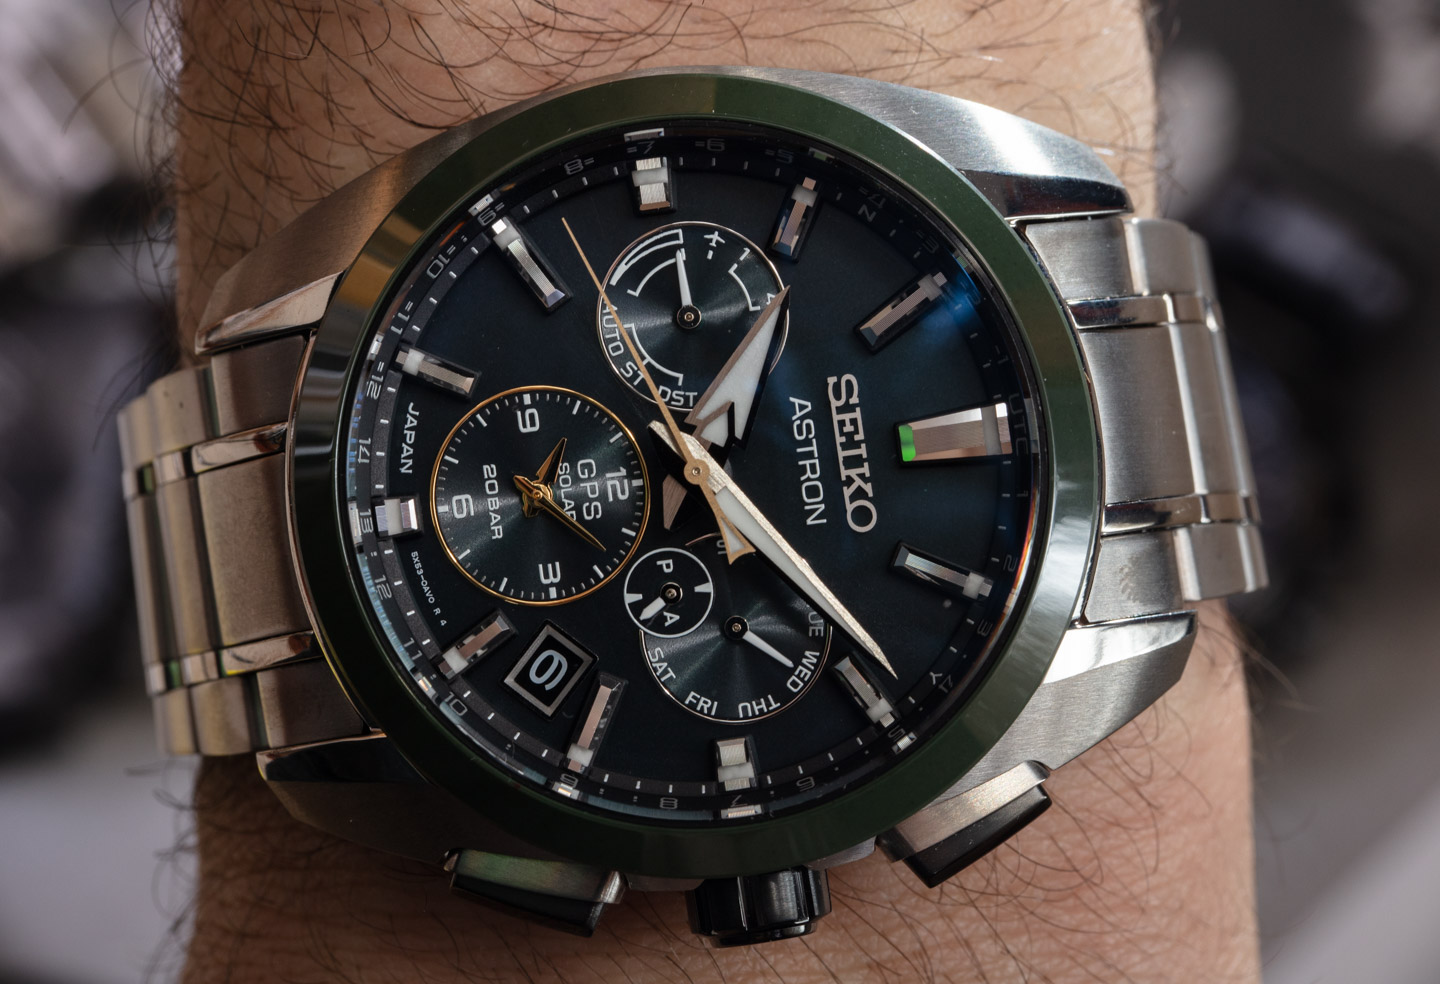 Seiko Honors Its Founder With Astron GPS Kintaro Hattori 160th Anniversary  Edition WatchTime USA's Watch Magazine 